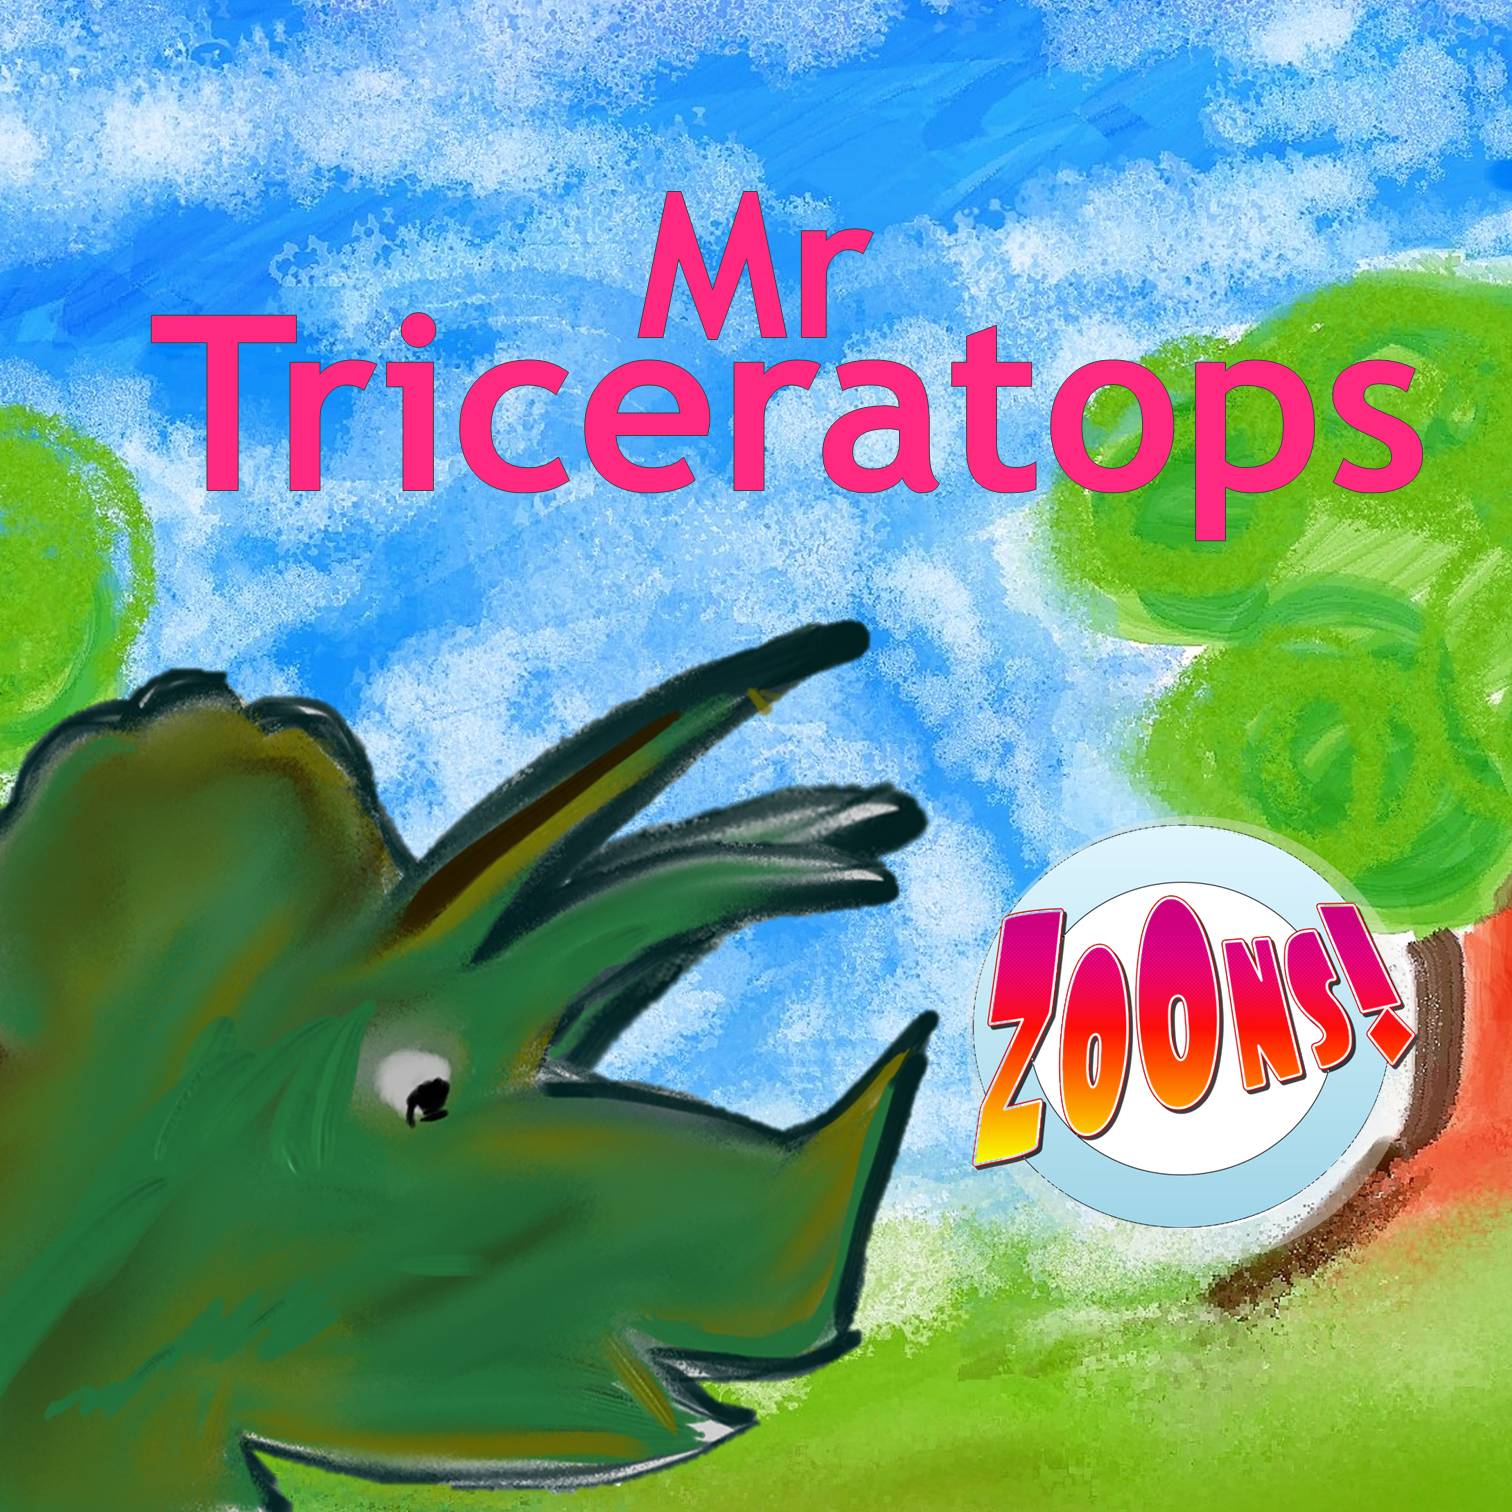 Mr Triceratops – your mum must love you lots!